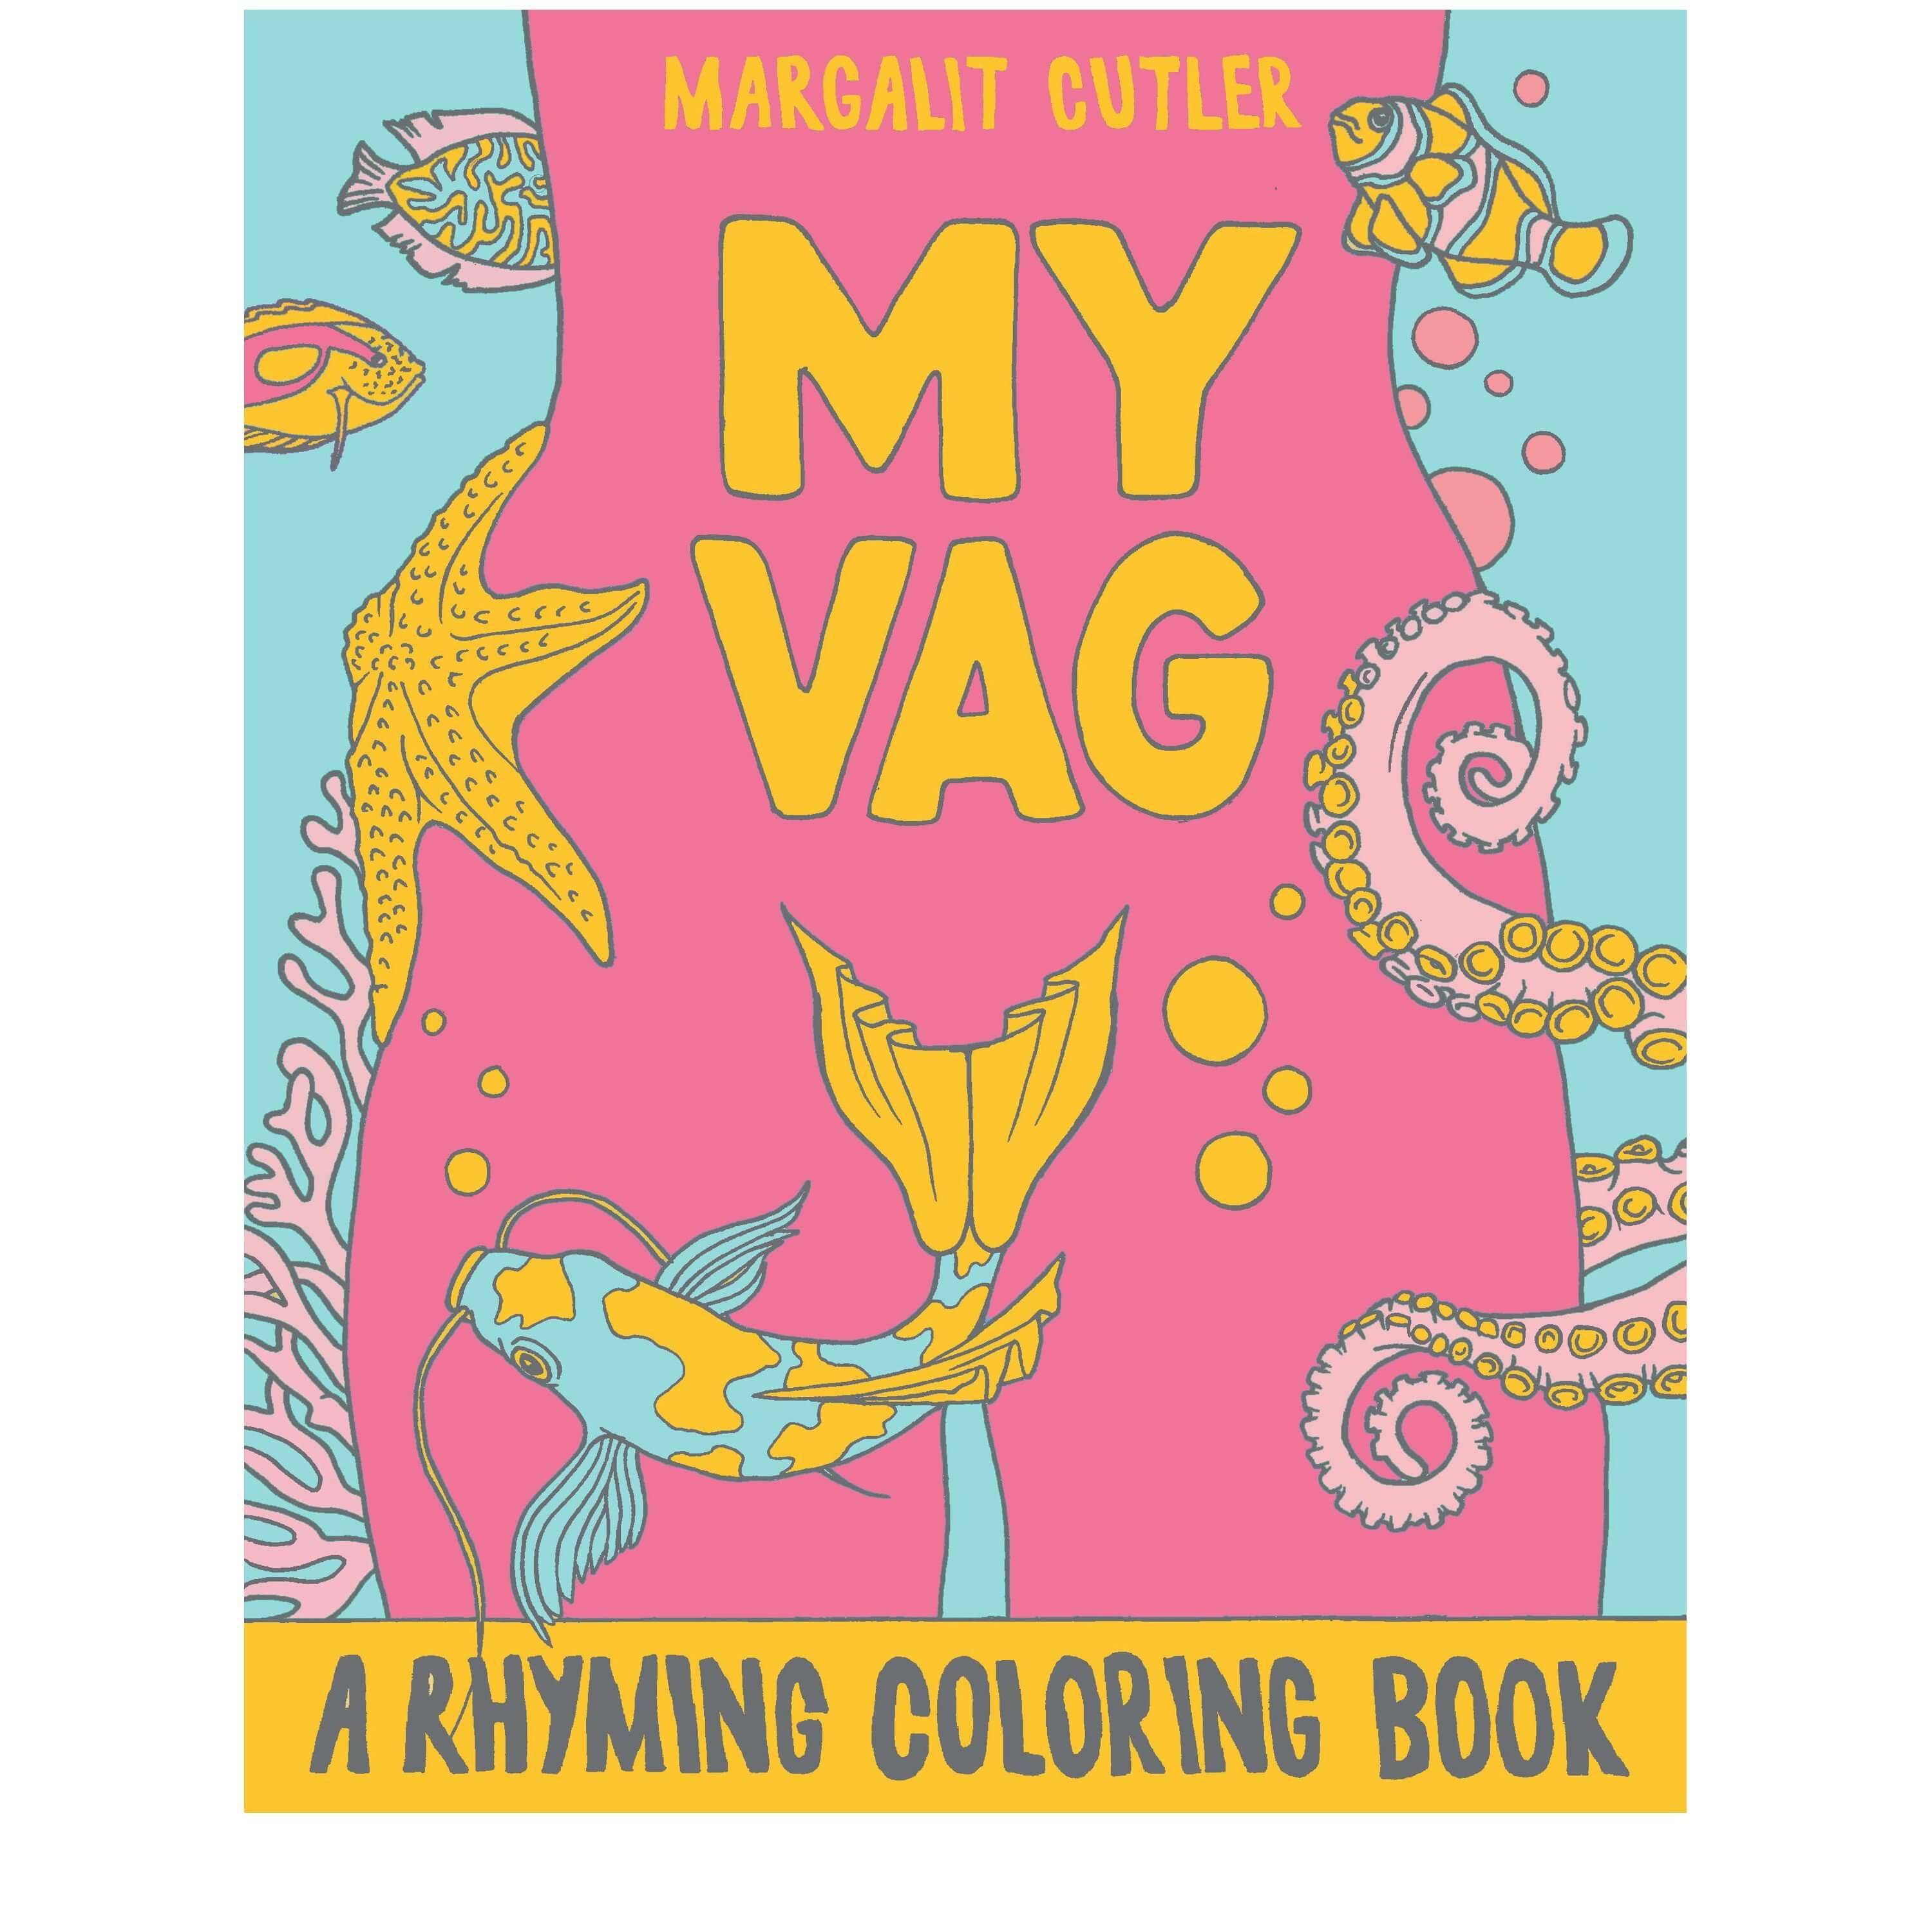 My Vag - Coloring Book - Independent publisher and distributor, Made in USA Microcosm Publishing